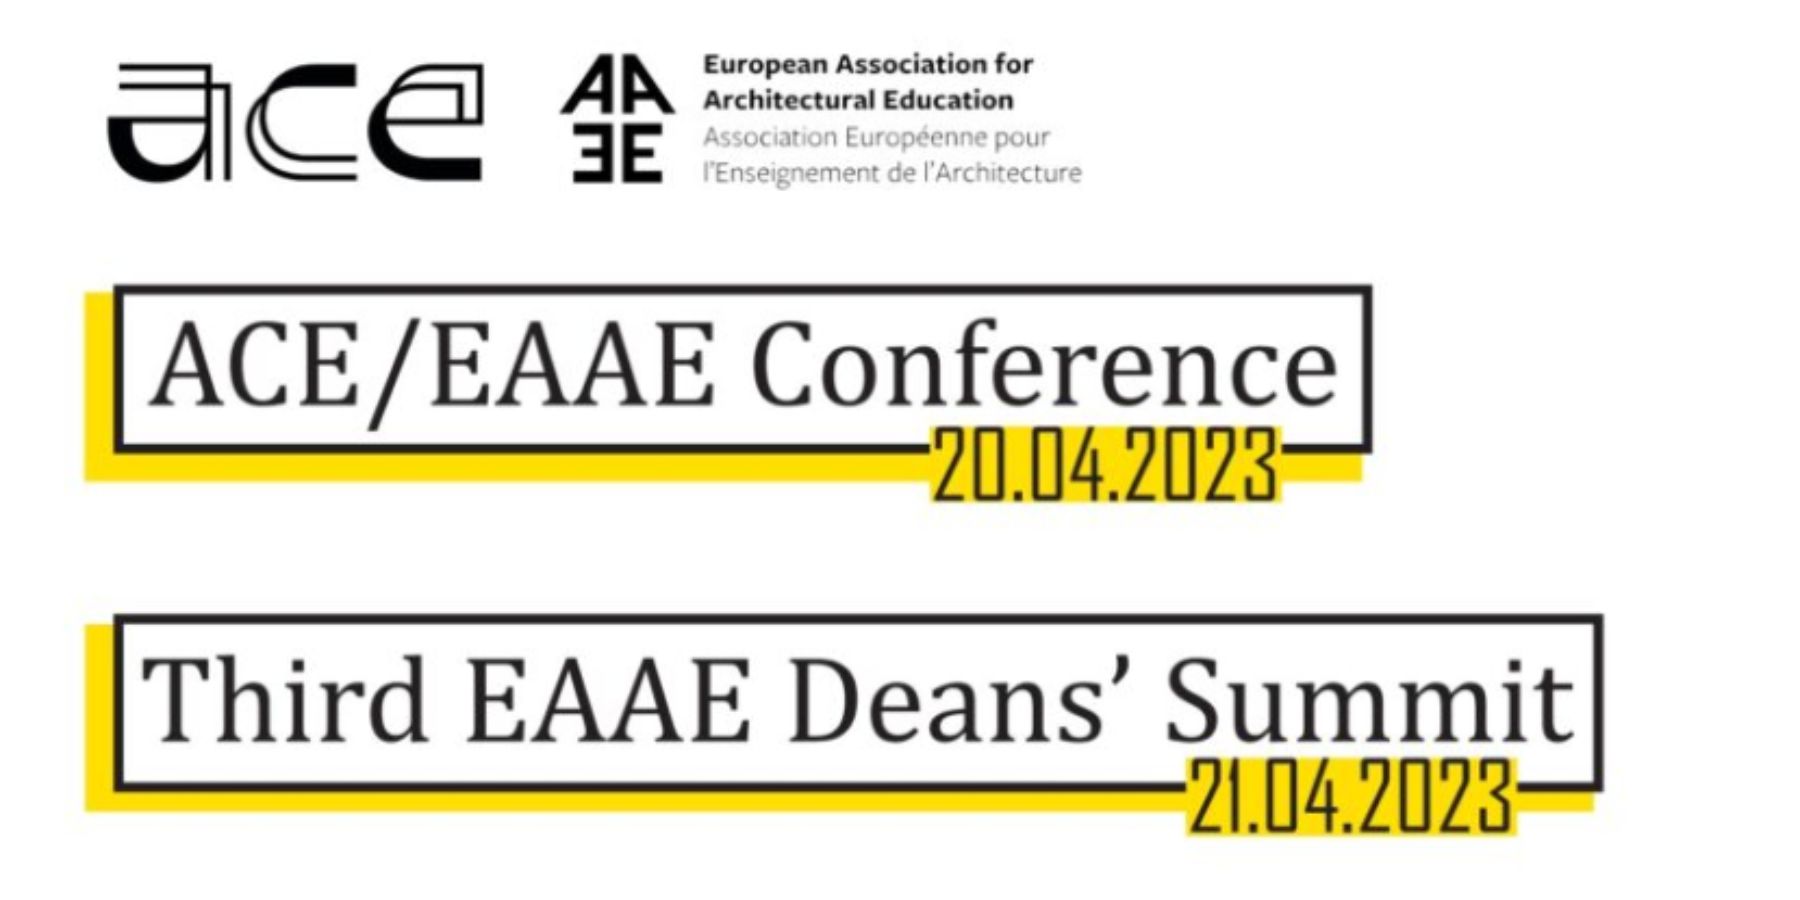 ACE/EAAE Conference & Third EAAE Deans’ Summit